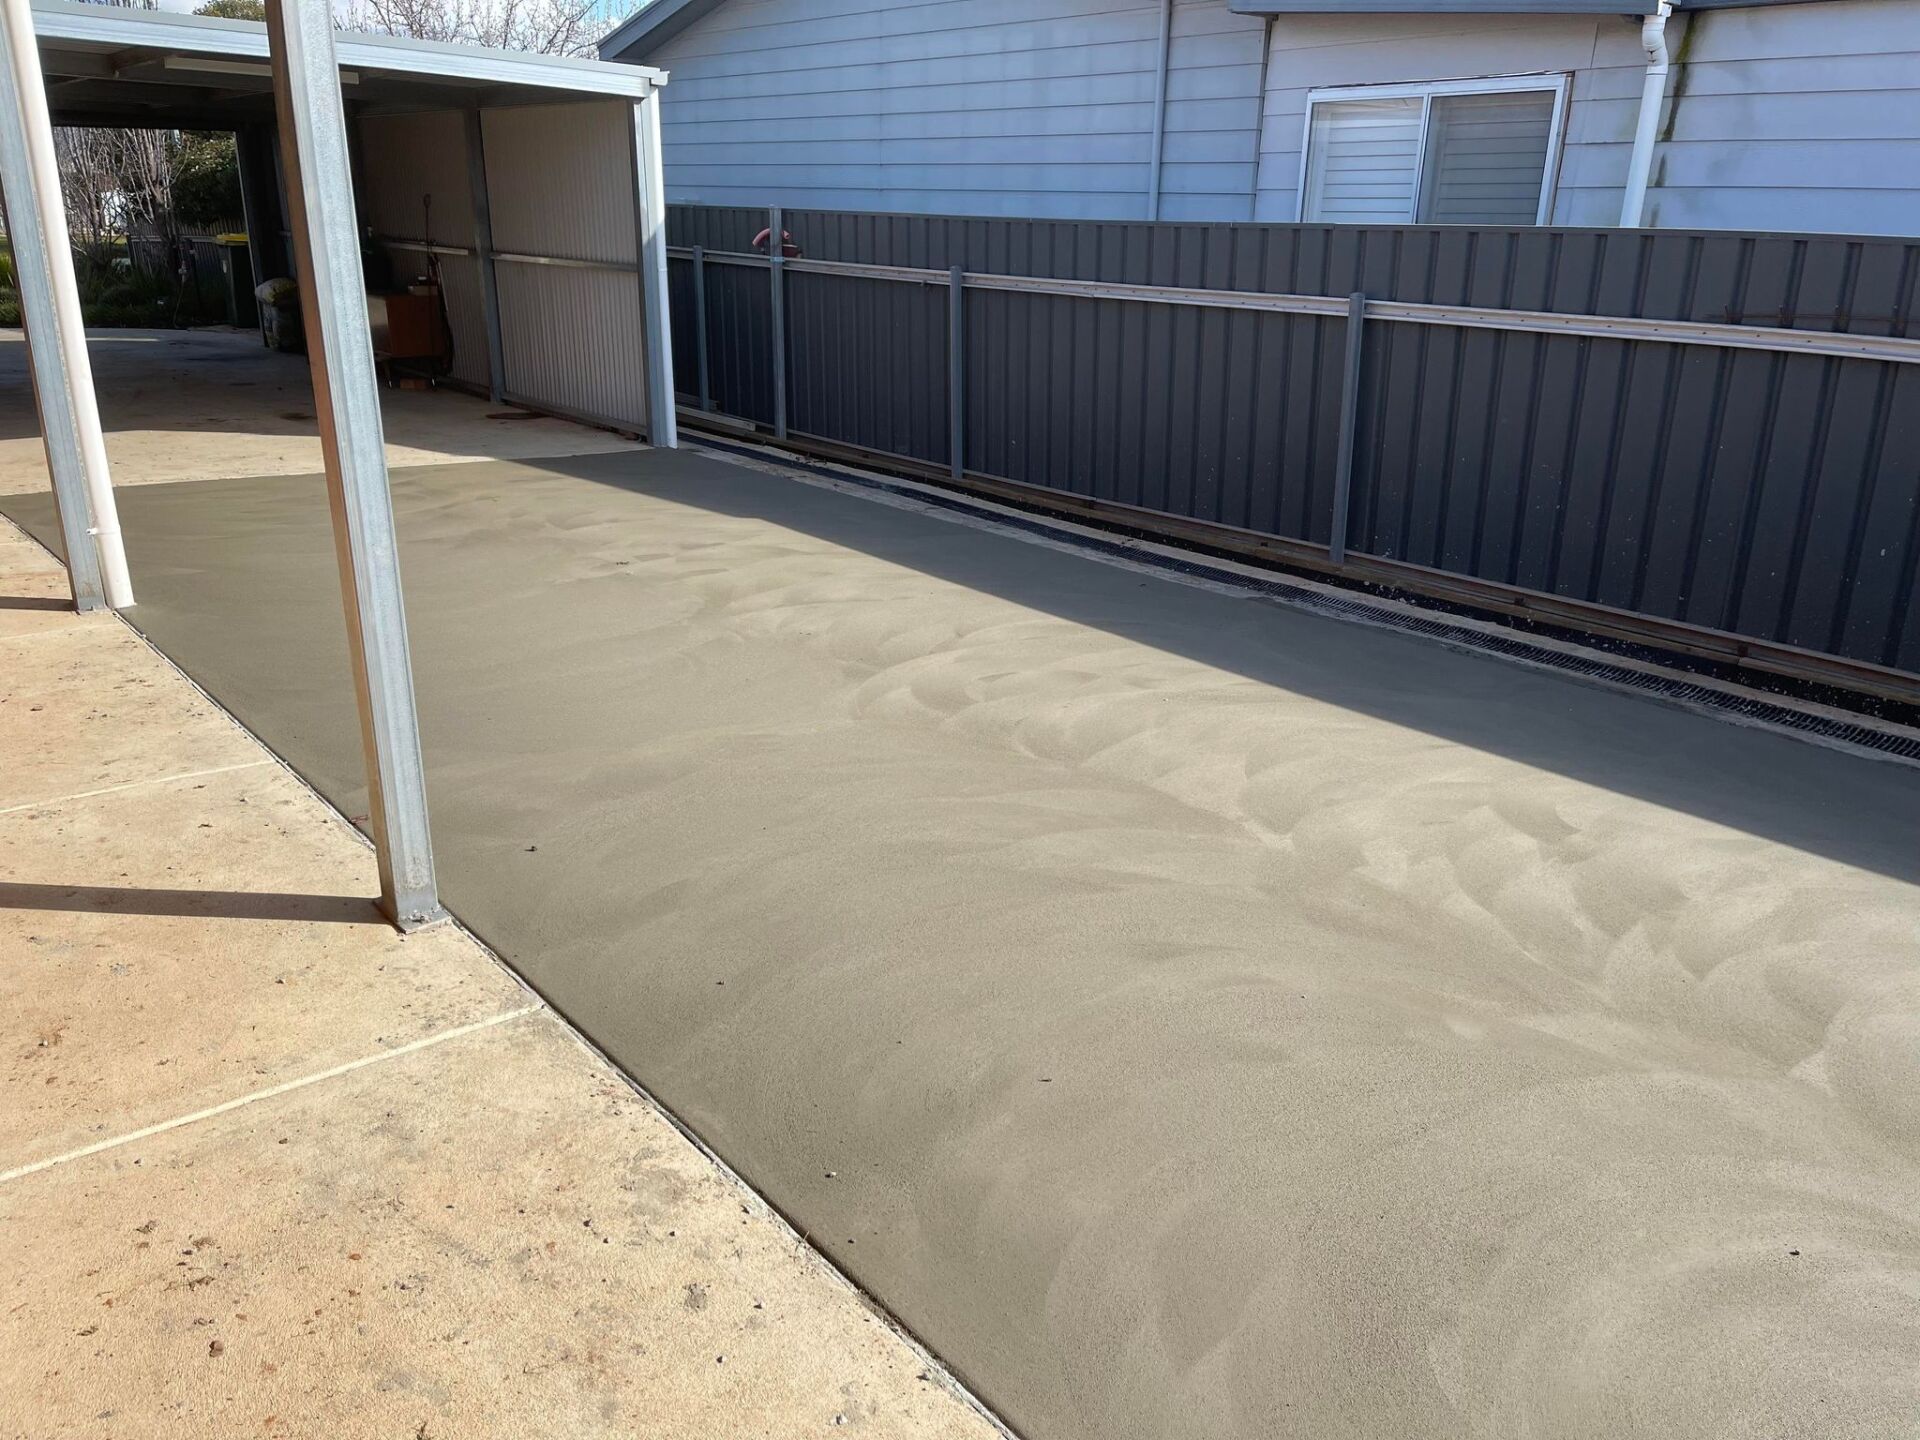 Concrete driveway installed and finished off providing an outstanding look.